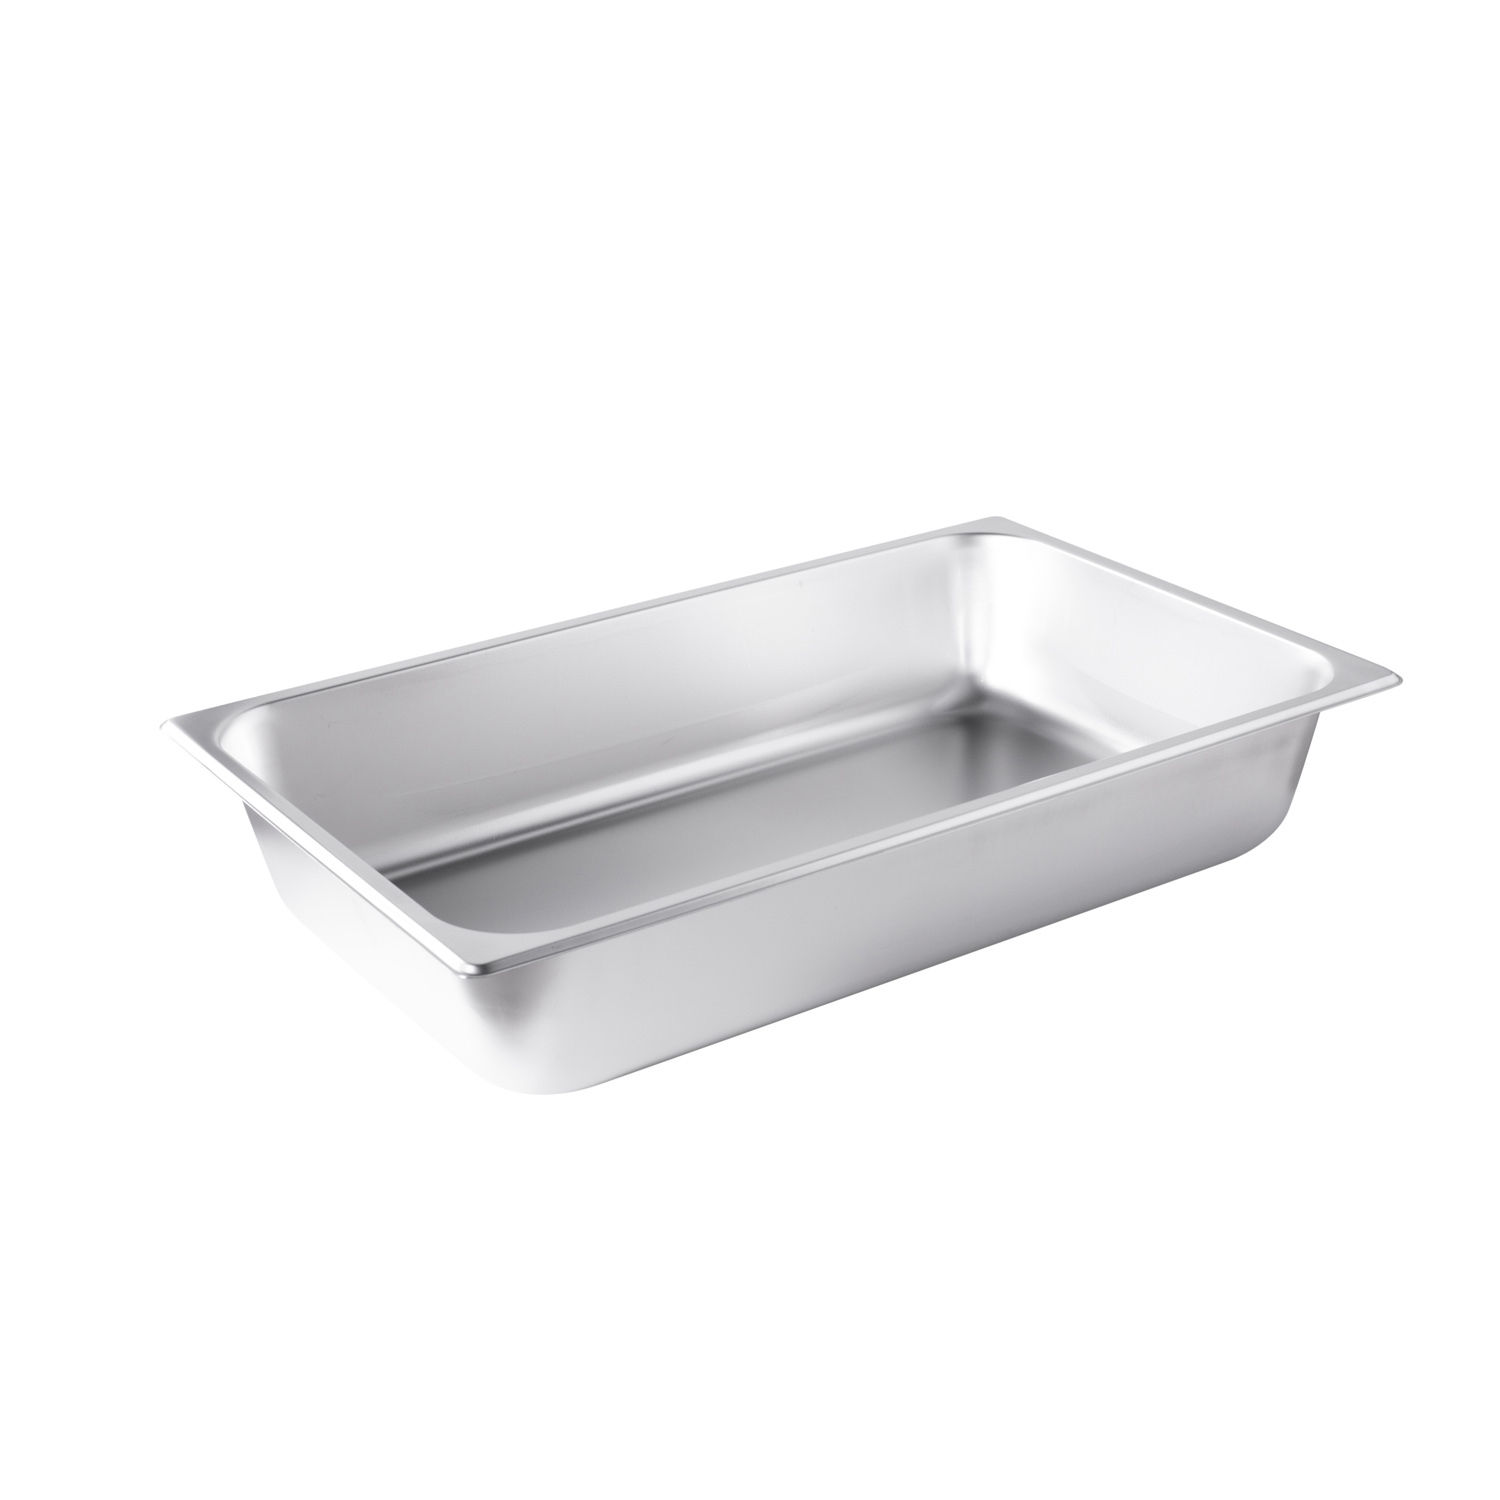 CAC China STPF-S25-4 Full Size 25-Gauge Stainless Steel Steam Pan, 4" Deep